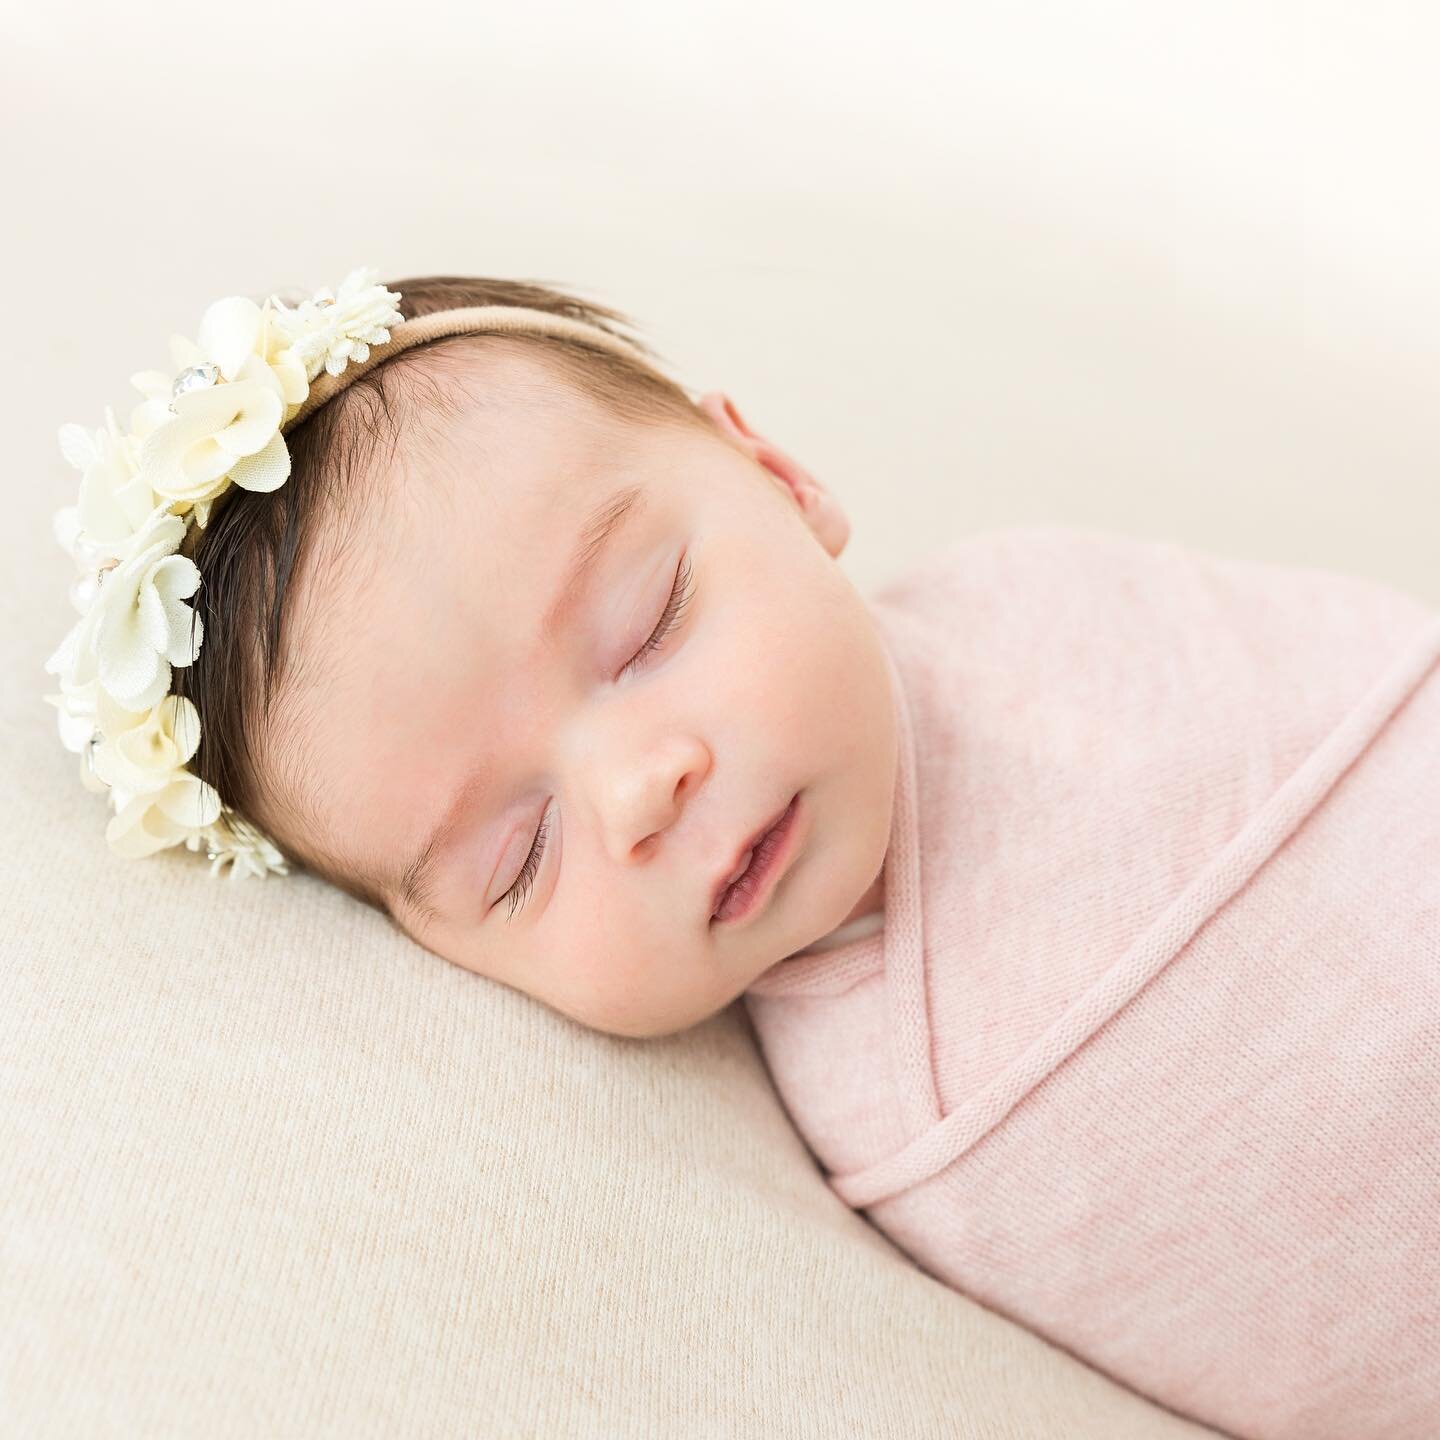 Practicing on Miss Blake. What a sweetheart! I&rsquo;m very quickly realizing why people have newborn studios. There is so much stuff! Sooner or later I&rsquo;ll do a model call. So much to learn but she was a wonderful first model!